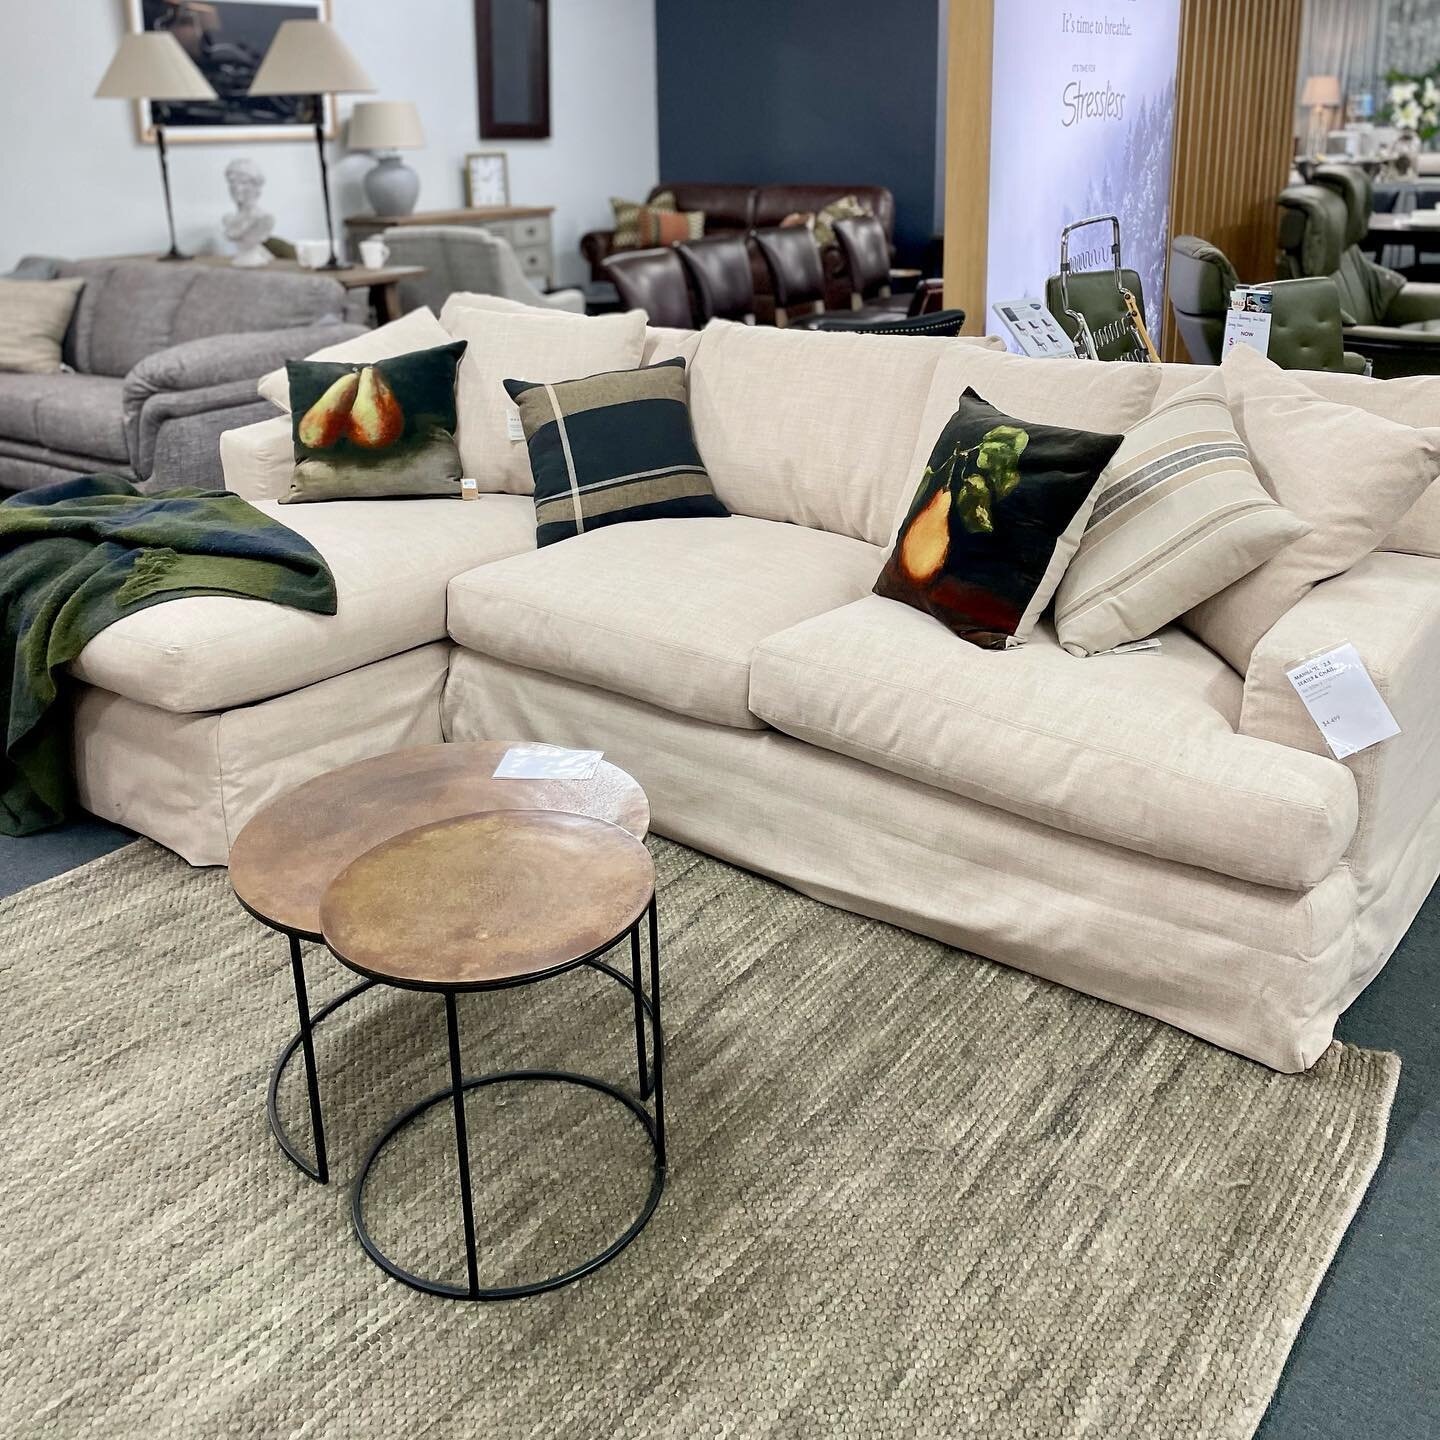 It&rsquo;s definitely a couch day! We love the Manhattan 2.5 seater + chaise for the ultimate lazy day. 

#MakingMidCanterburyatHome #ashburtonnz #rainyday